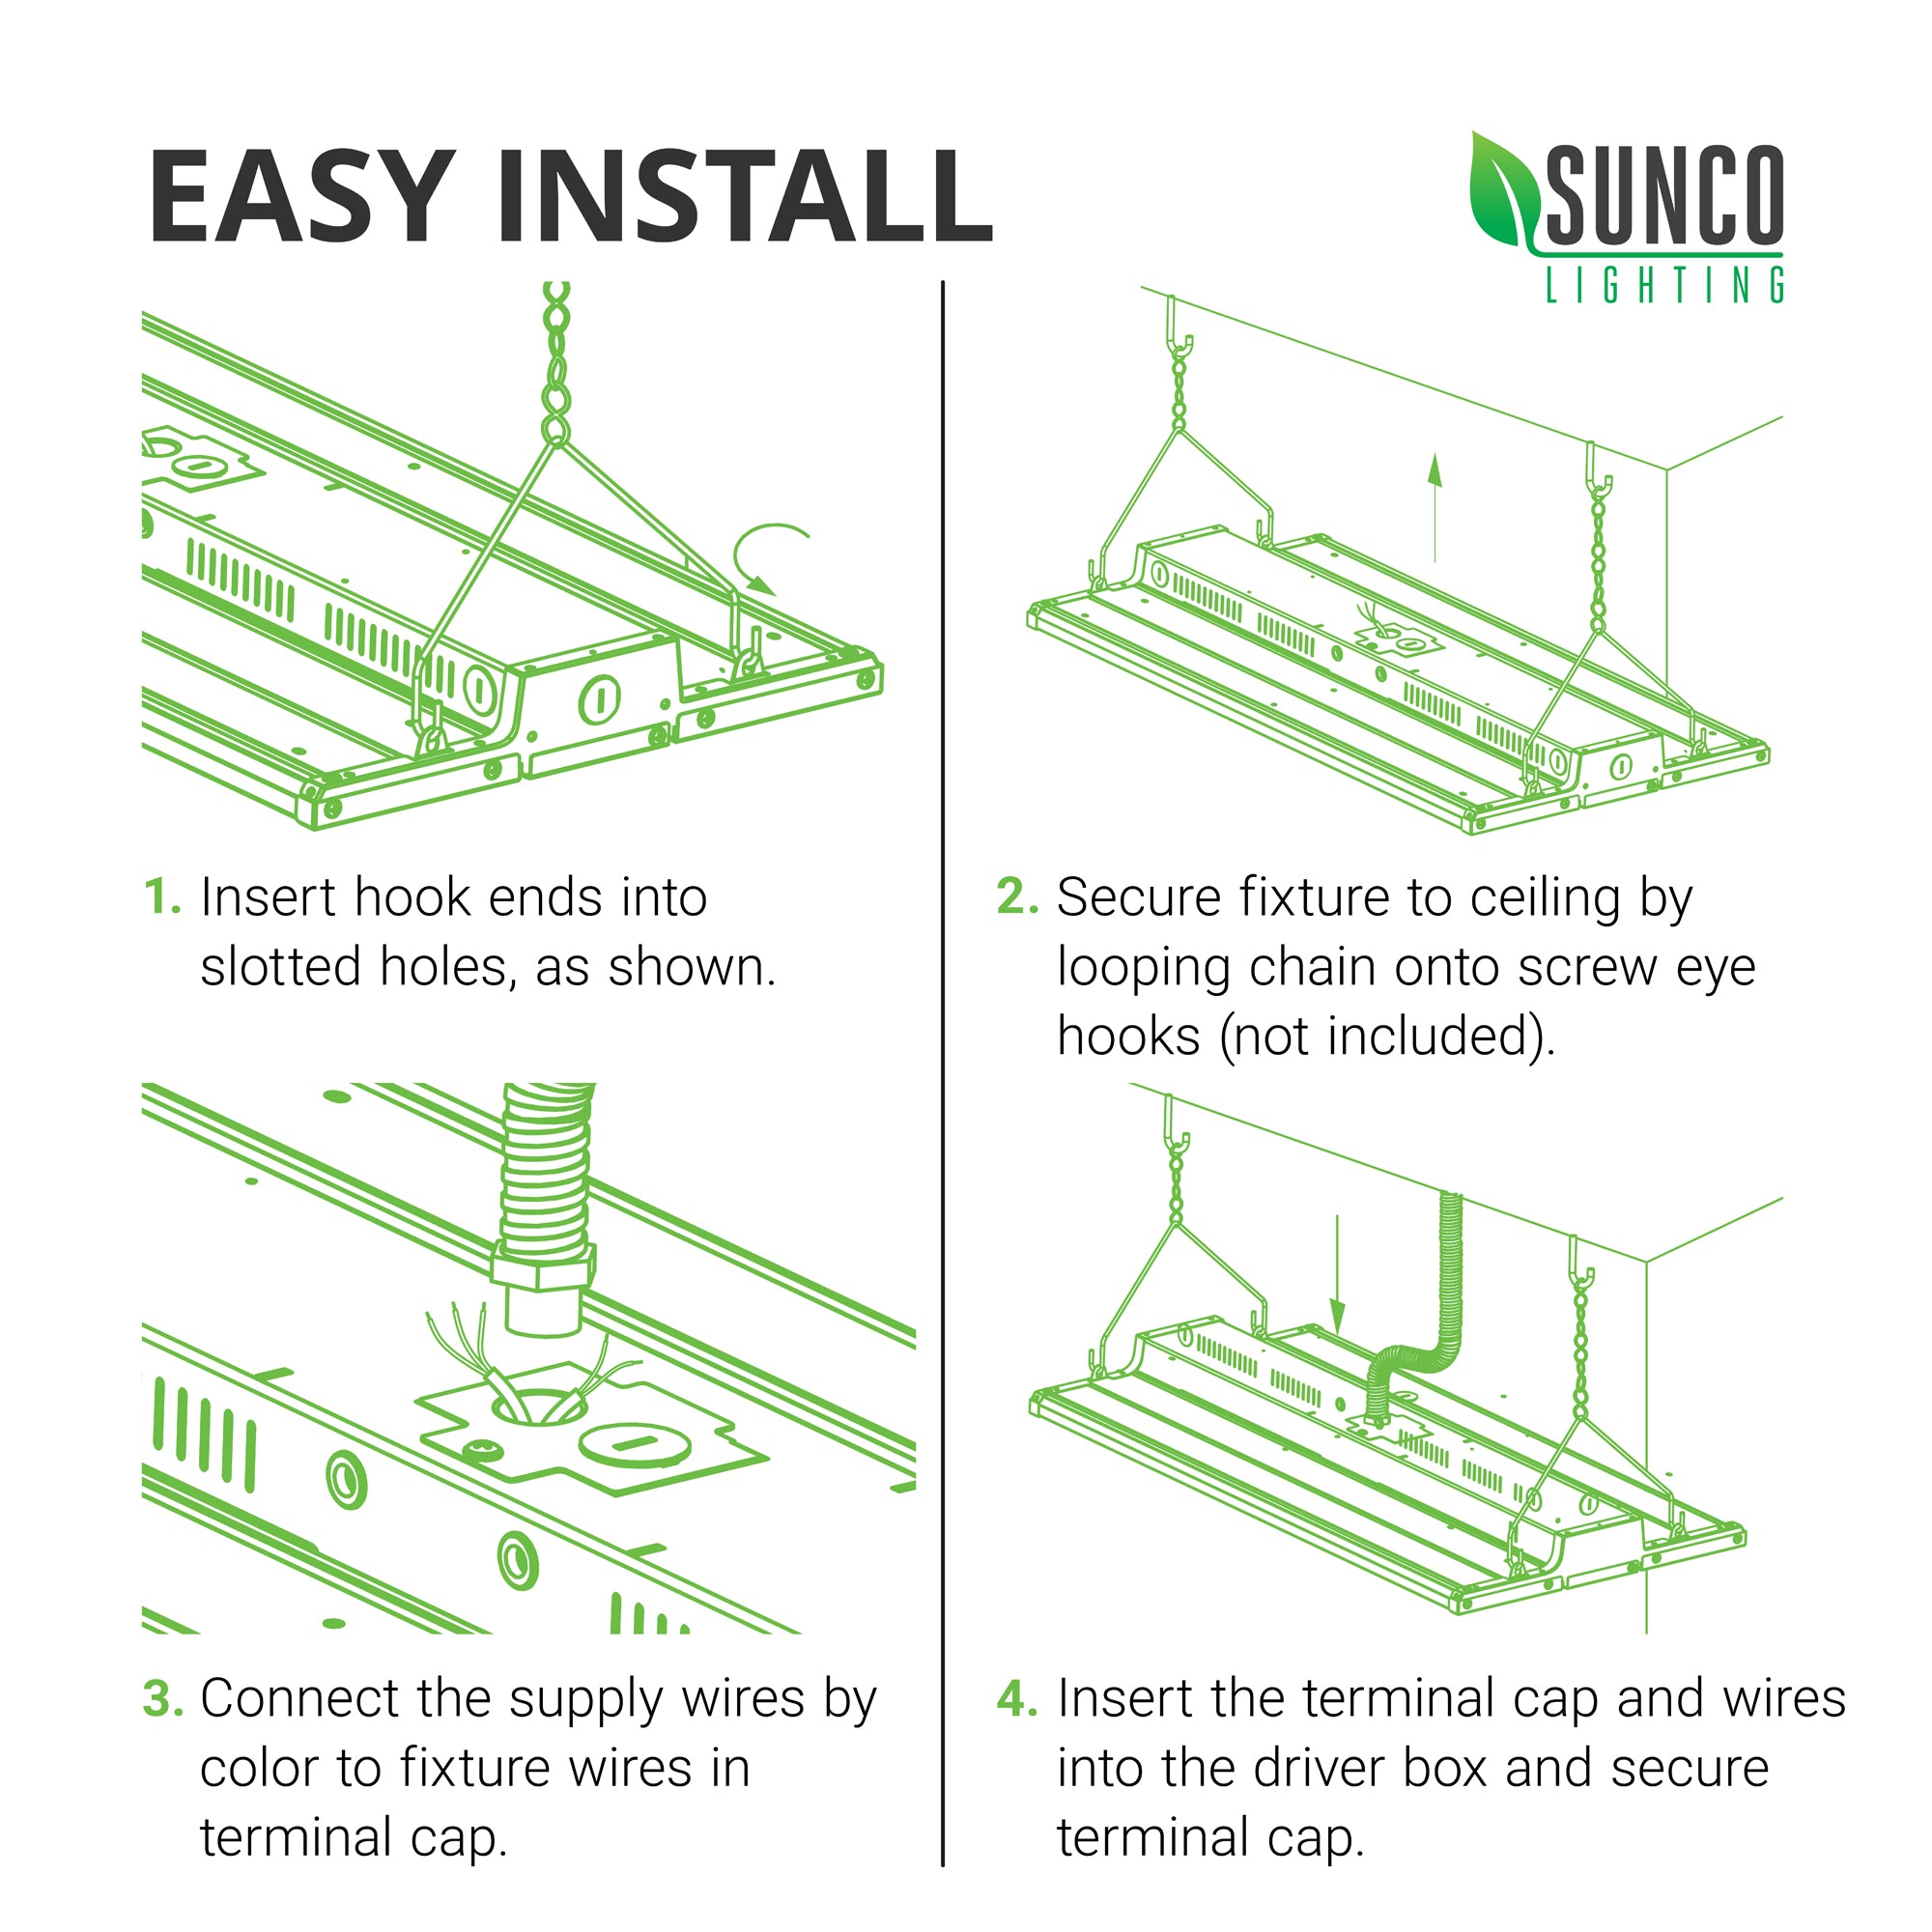 Easy Install of the Sunco LED Linear High Bay. Install instructions are expanded in the user manual. Here are the basic steps: 1. Insert hook ends of V hook into slotted holes as shown. 2. Secure fixture to ceiling by looping chain onto screw eye hooks (not included). 3. Connect the supply wires by color to fixture wires in terminal caps. 4. Insert the terminal cap and wires into the driver box and secure terminal cap. Image shows line art of easy installation process.